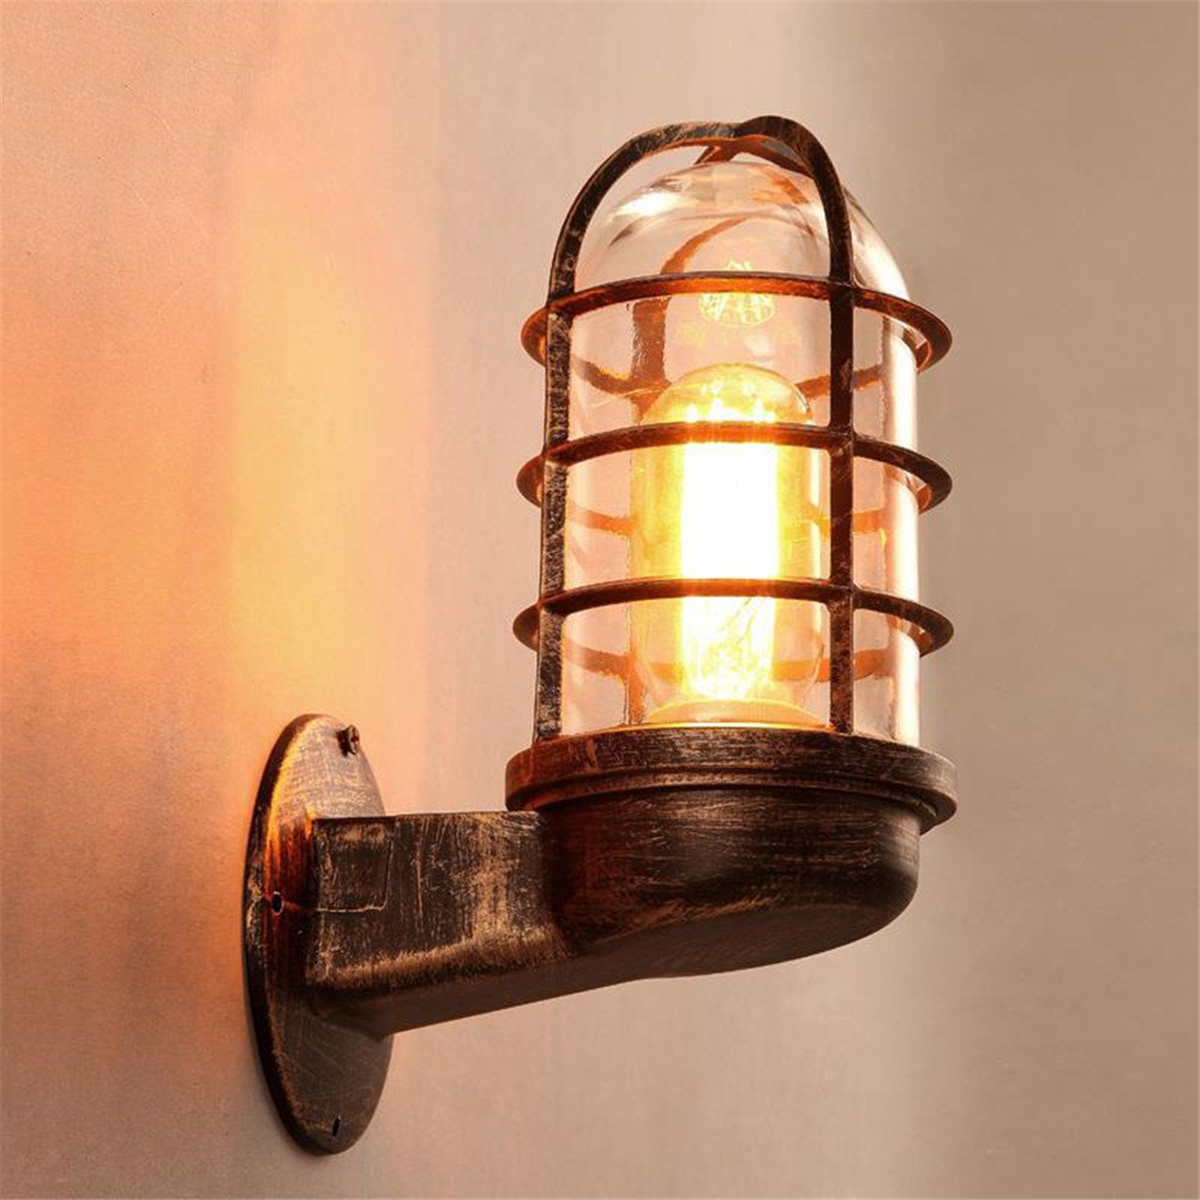 Vintage-Industrial-Unique-Wall-Lamp-Iron-Rustic-Copper-Steampunk-Lamp-Sconce-1635620-4